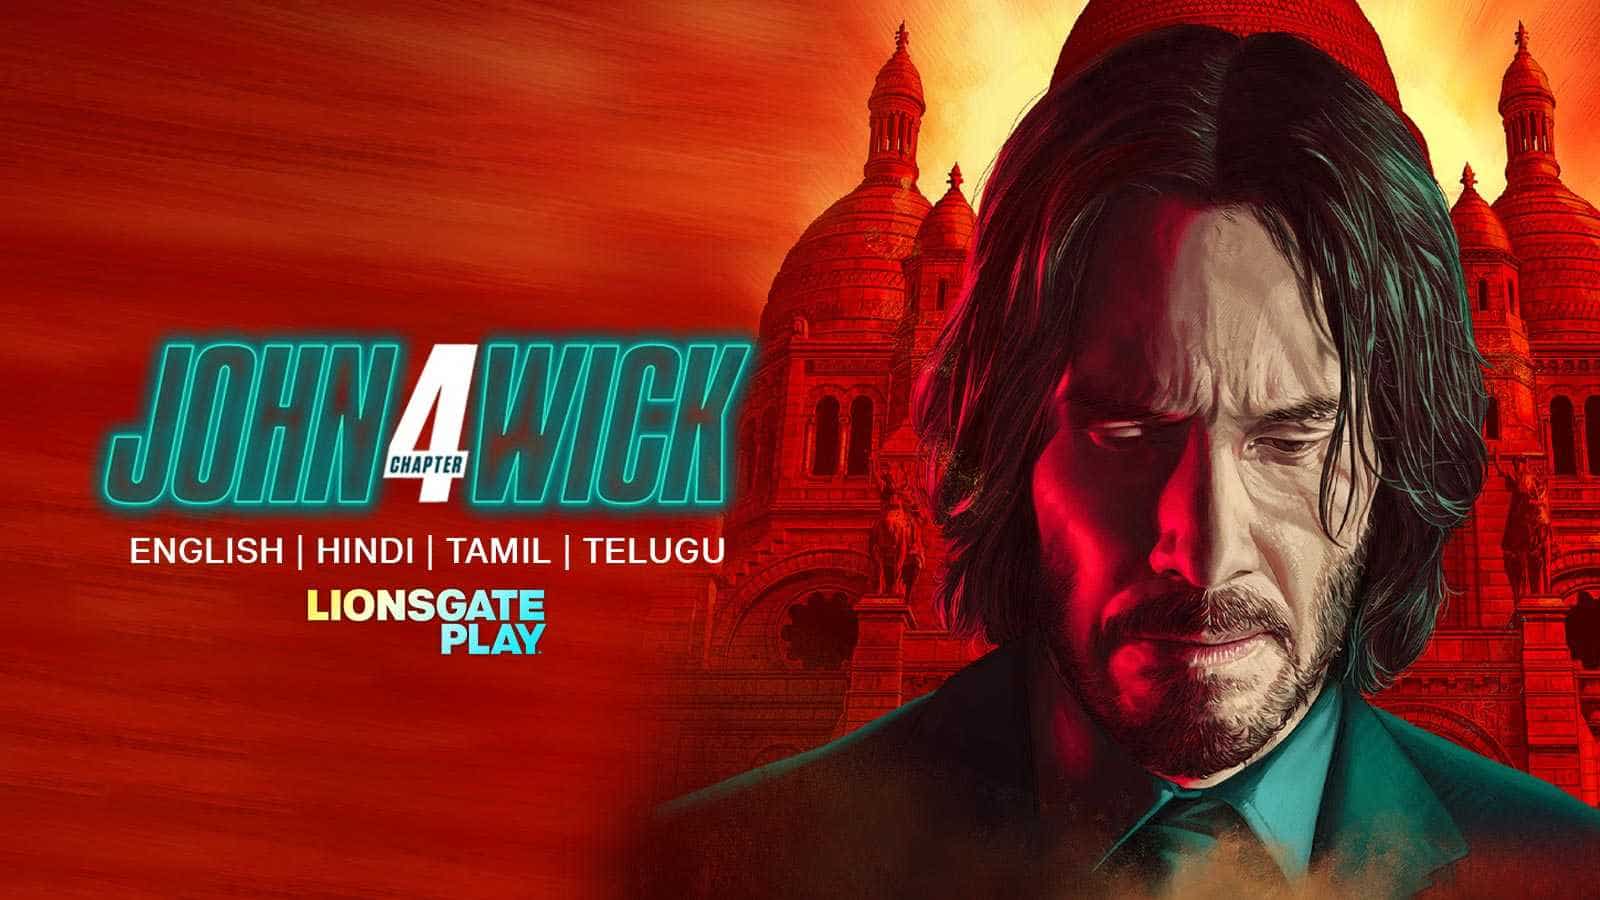 John Wick 4 promises a week of exclusives: a new teaser and a  never-before-seen poster - Meristation